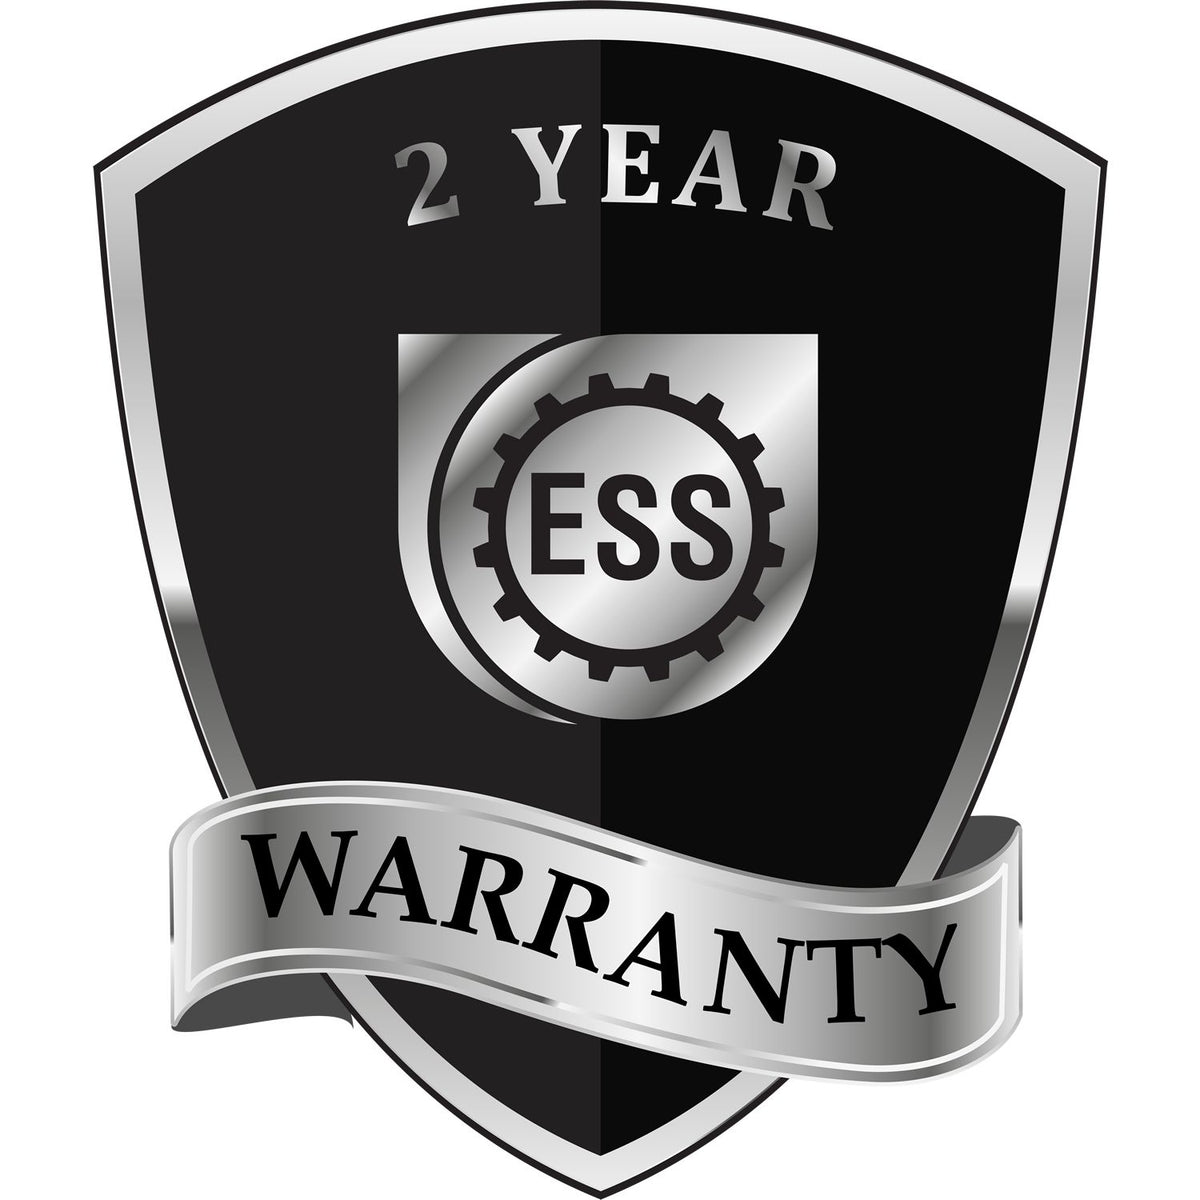 A black and silver badge or emblem showing warranty information for the Gift Oregon Geologist Seal